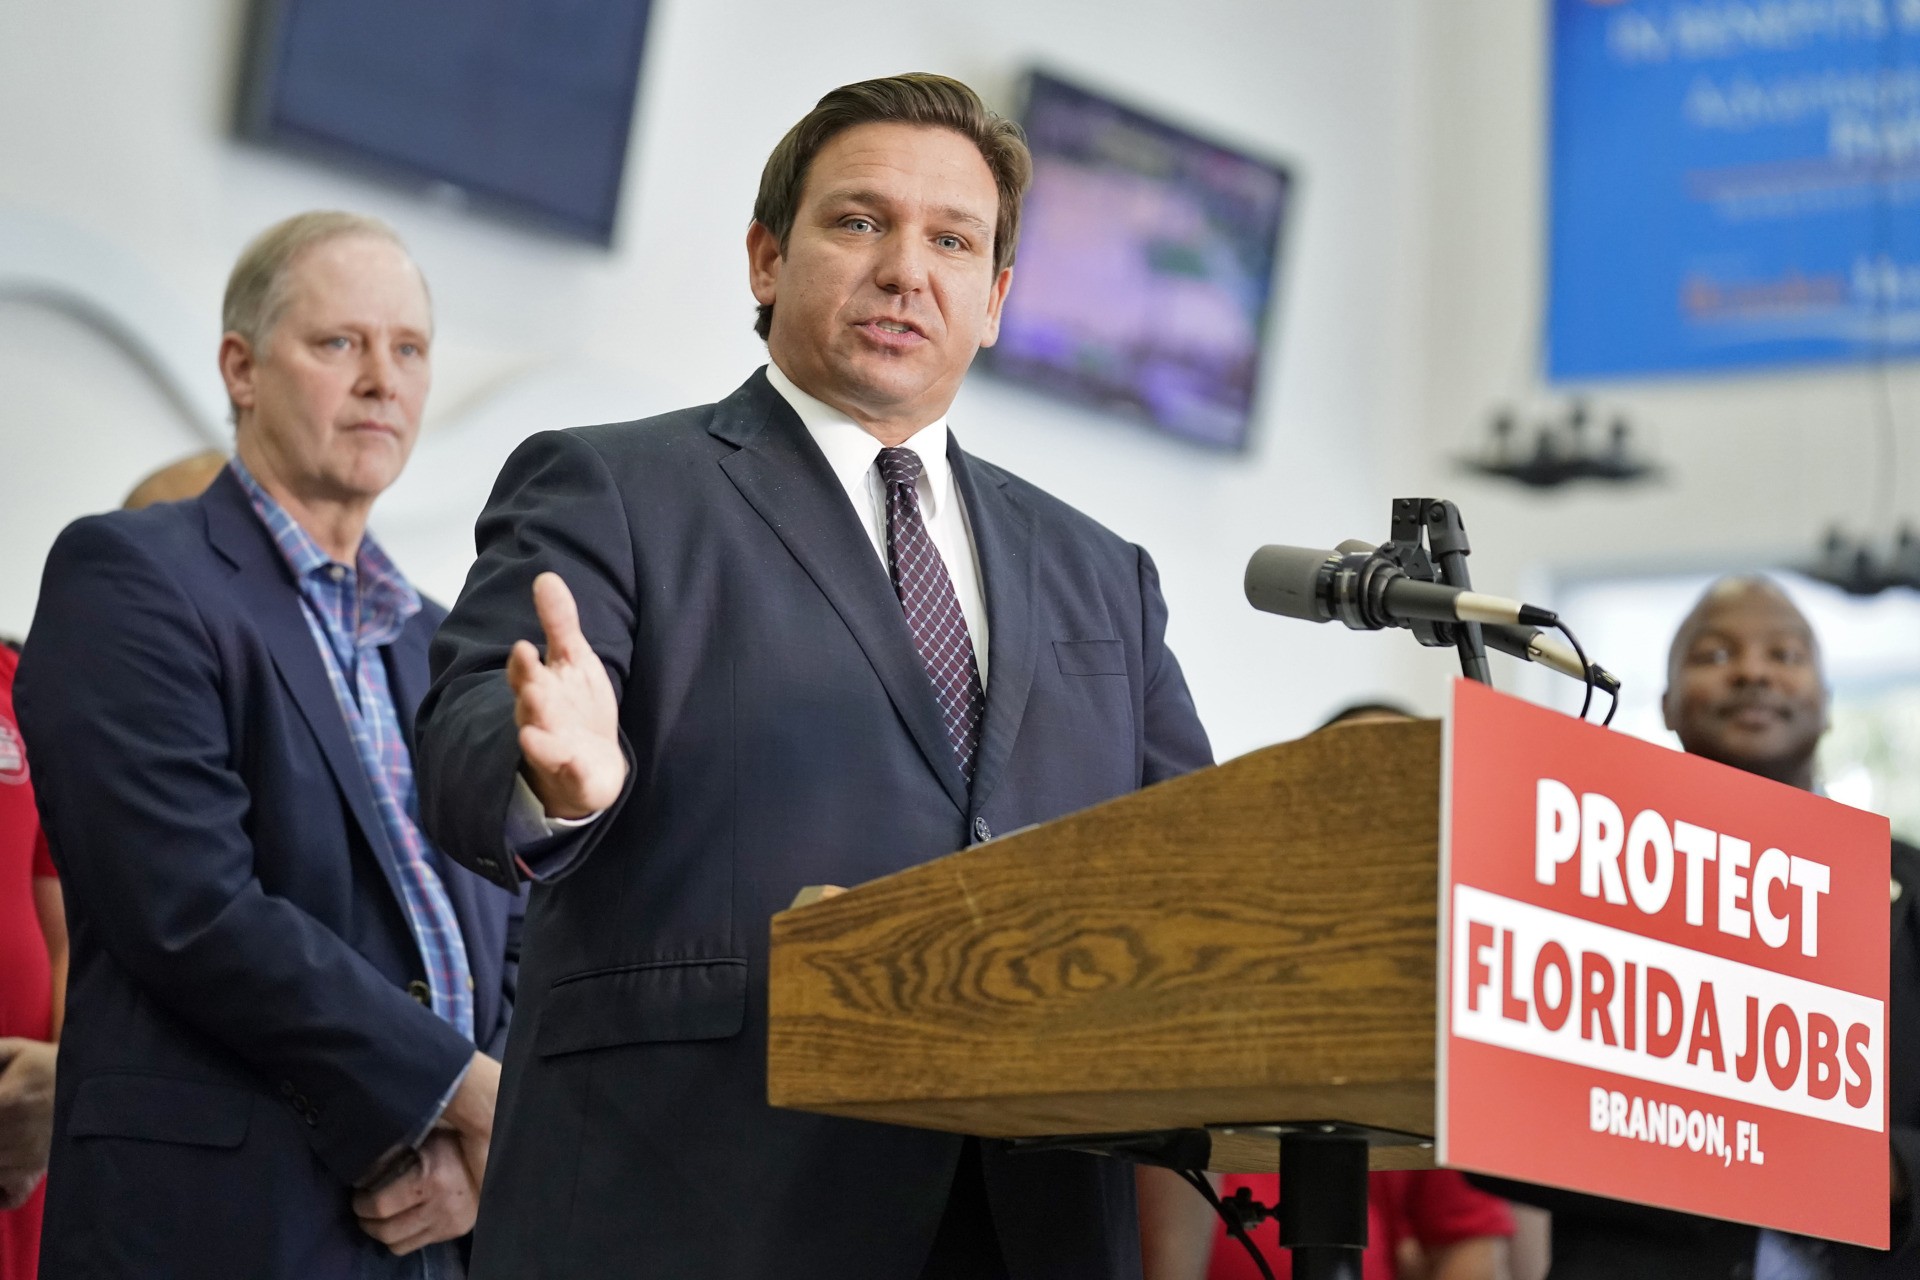 Florida Gov. Ron DeSantis speaks to supporters and members of the media after a bill signing Thursday, Nov. 18, 2021, in Brandon, Fla. DeSantis signed a bill that protects employees and their families from coronavirus vaccine and mask mandates.